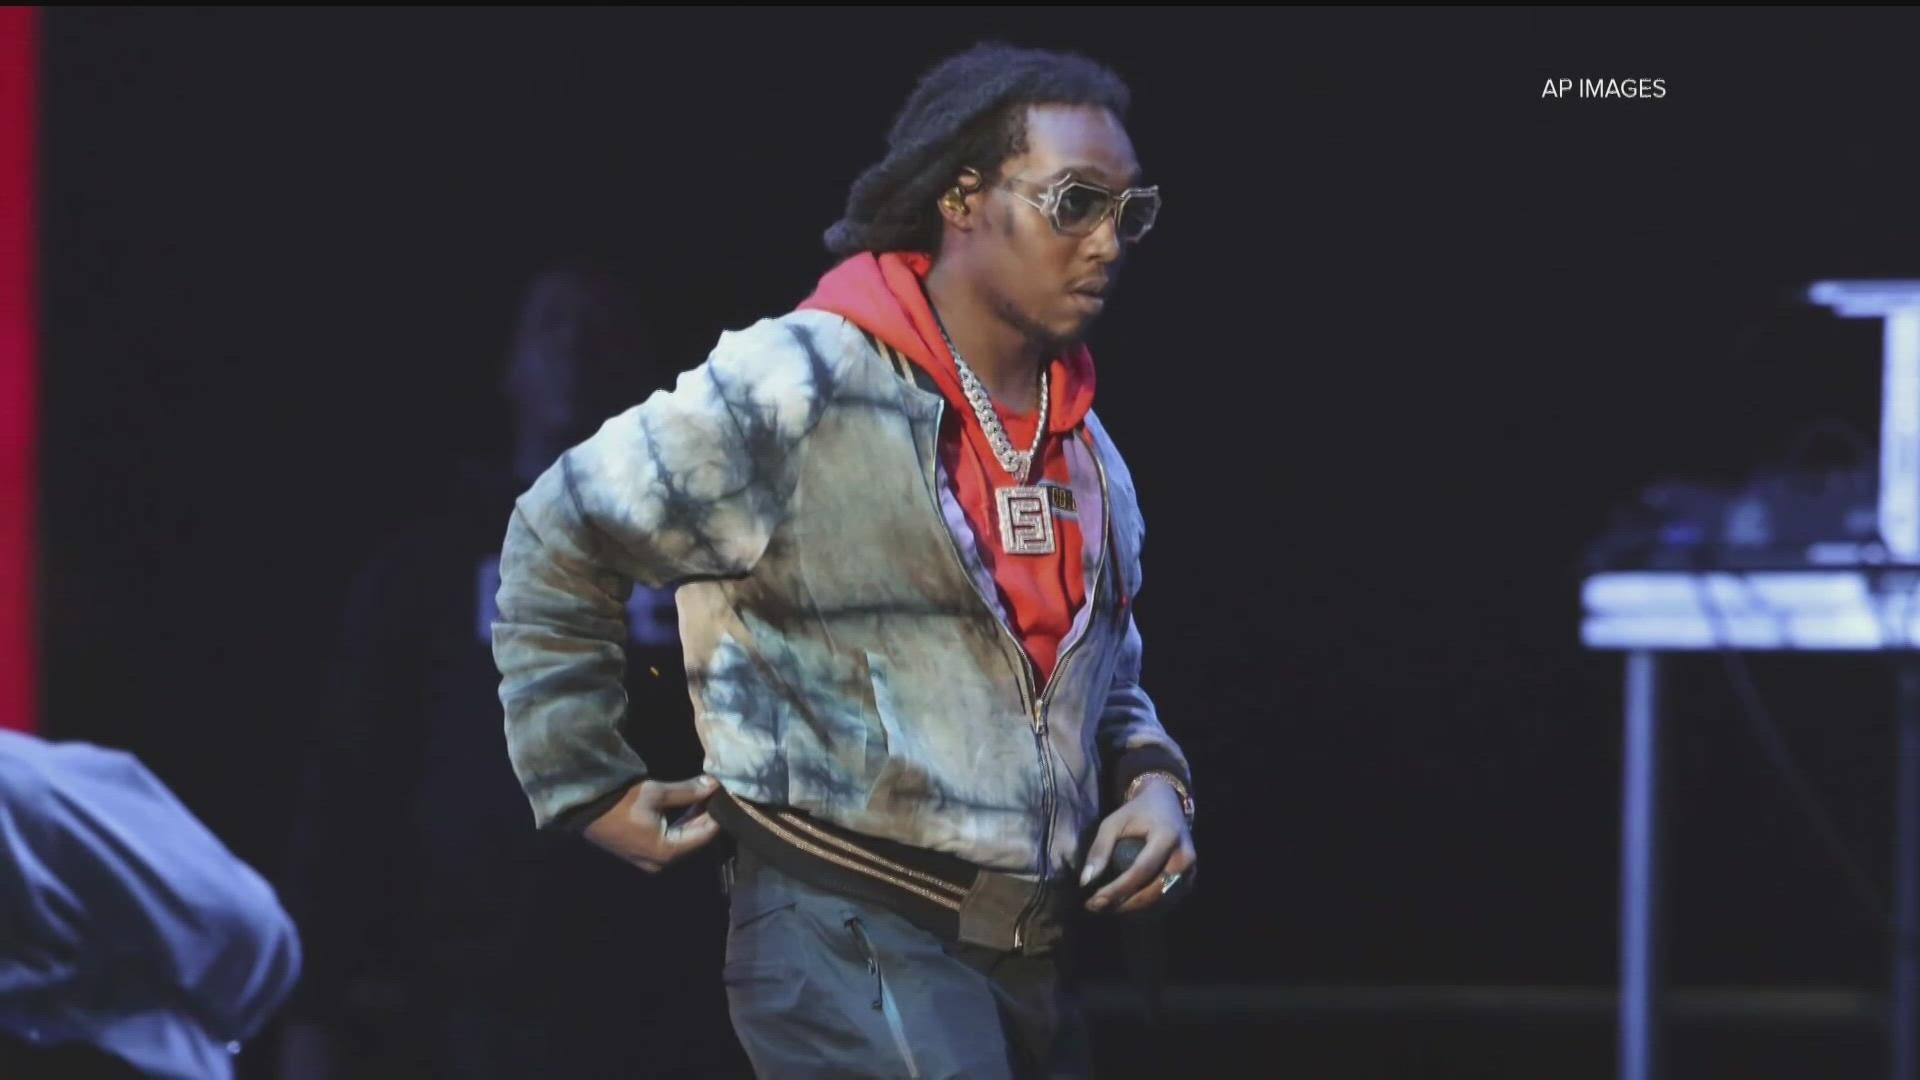 TakeOff was shot and killed in Houston 3 months ago.